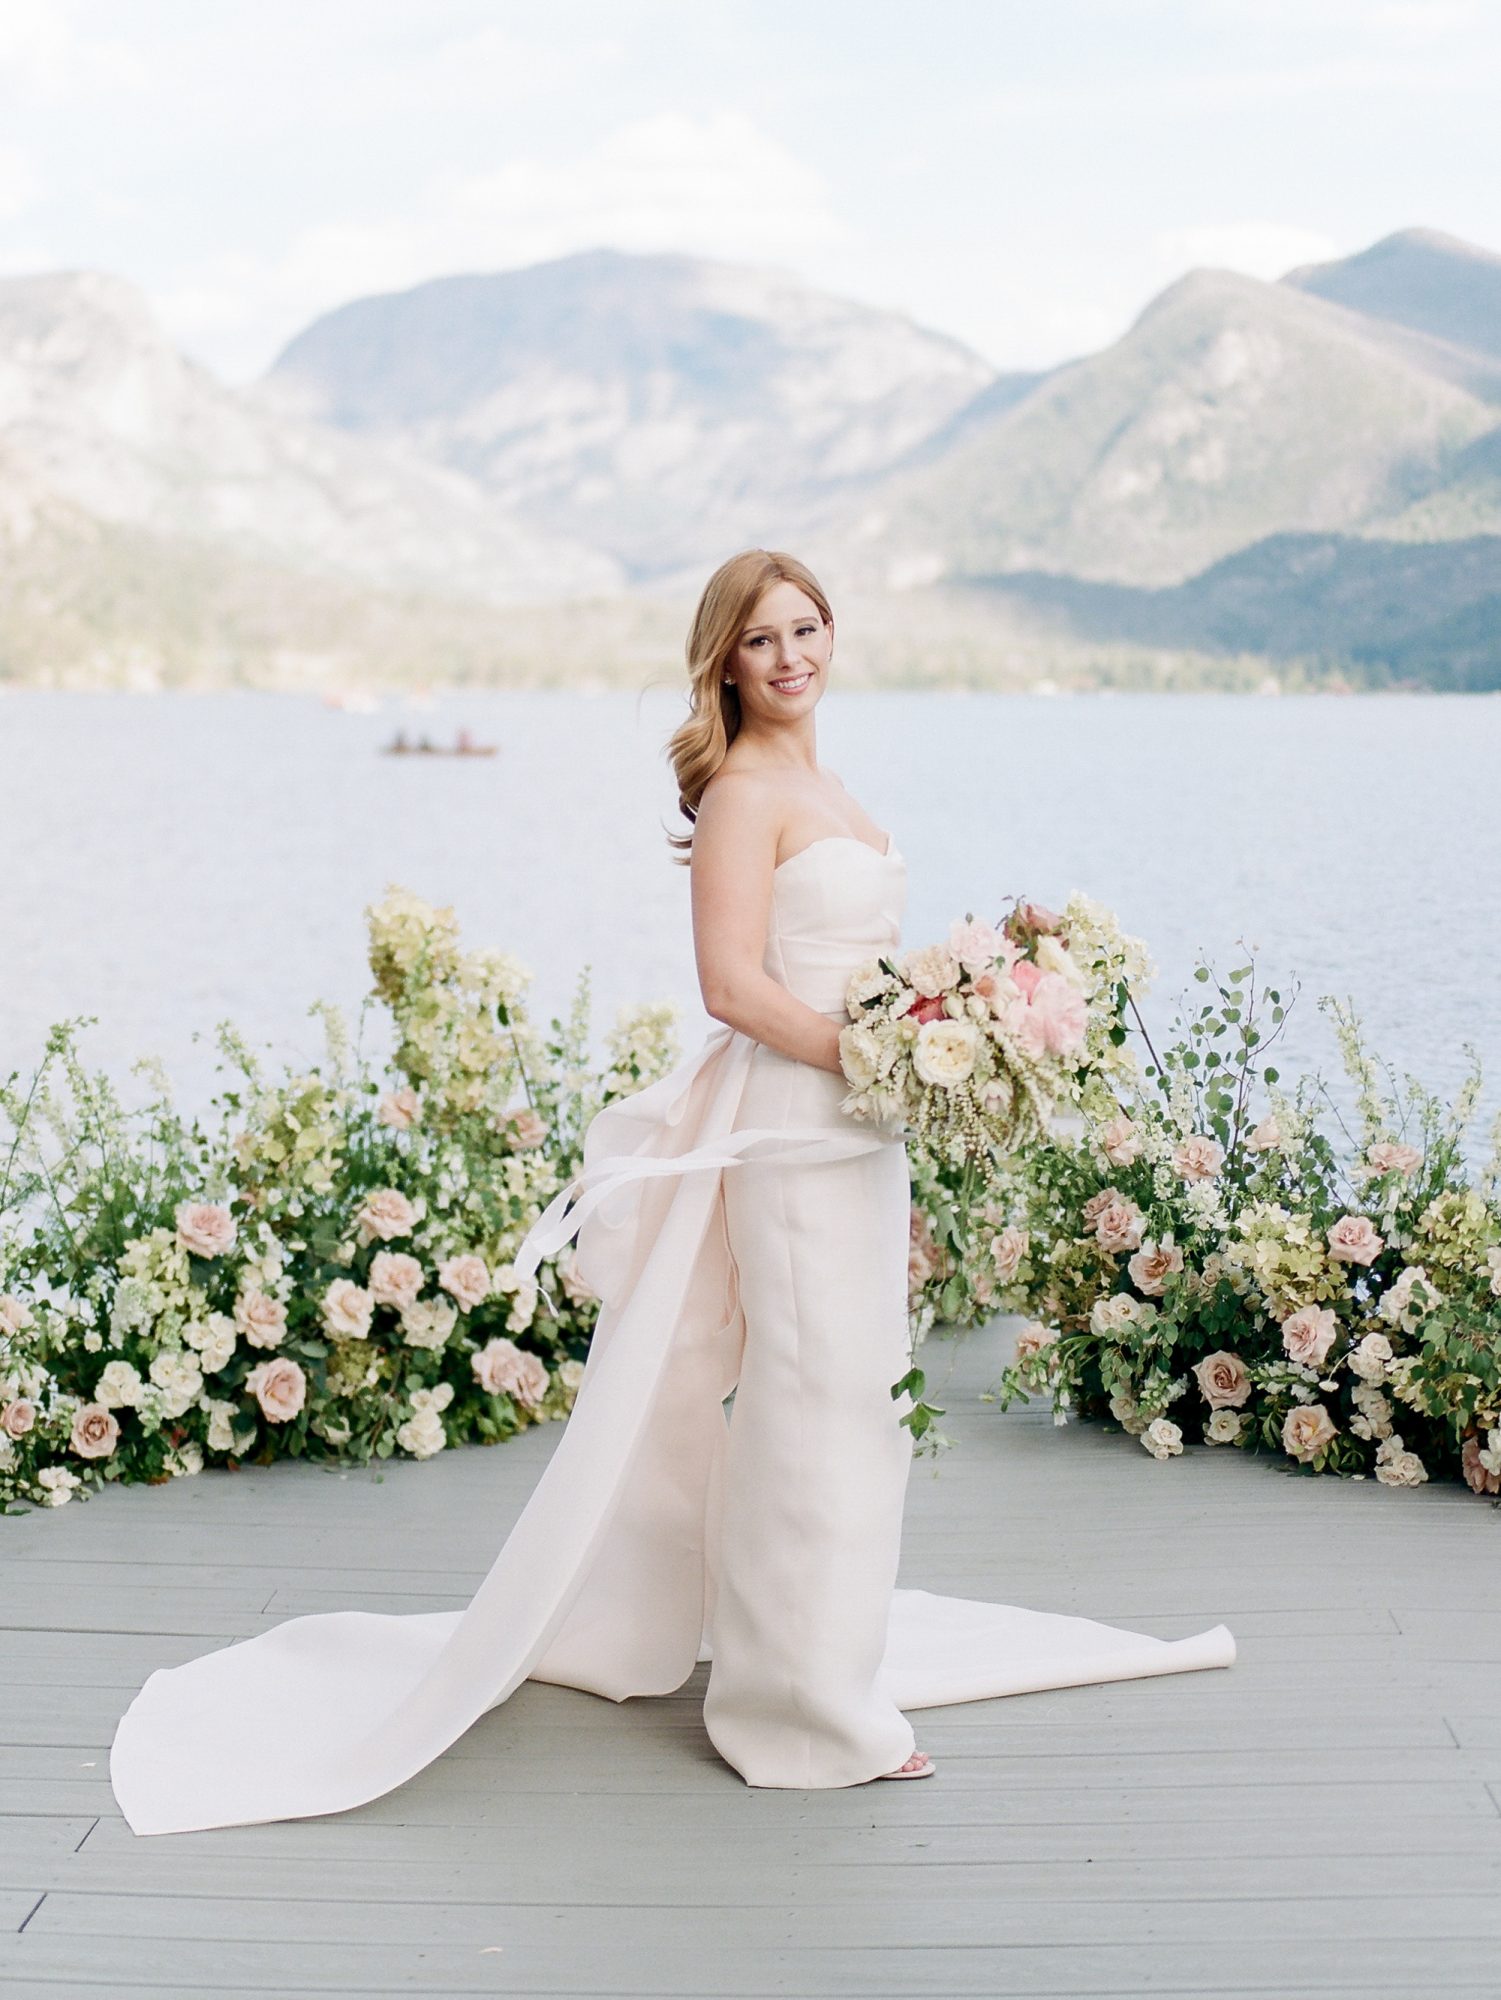 Moniquie Lhuillier Wedding Gown. Florals by Bows and Arrows. Photo by Rachel Havel